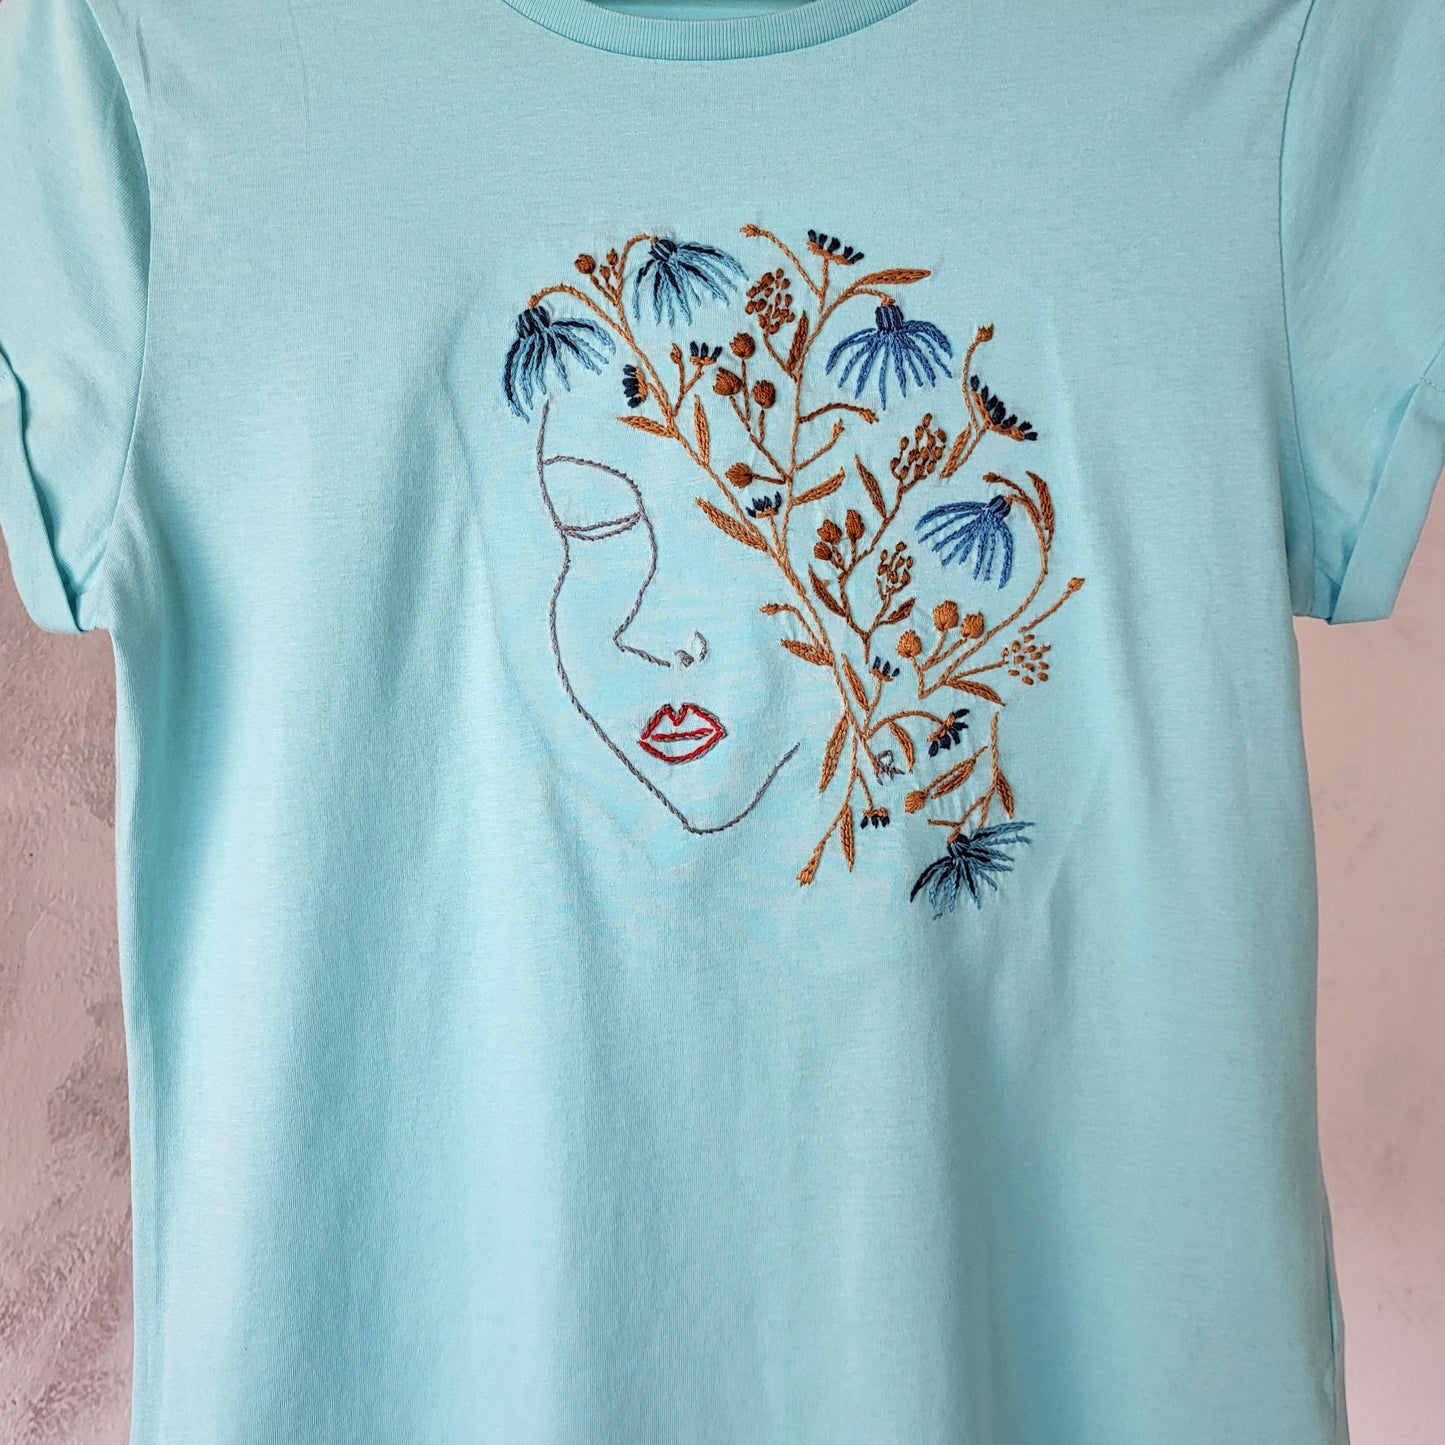 Anne-Marie Roth - Serie: Naturwesen - turquoise T-Shirt S - Unique Artwear